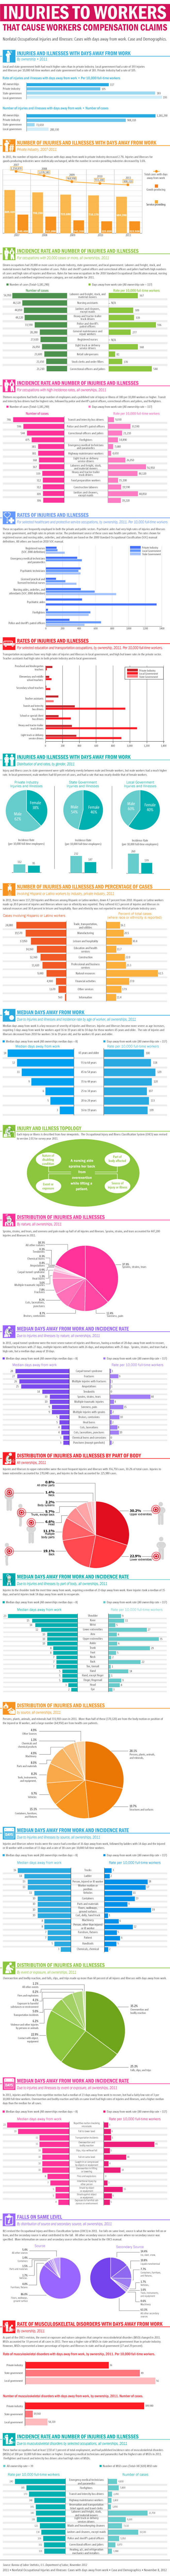 workers compensation data